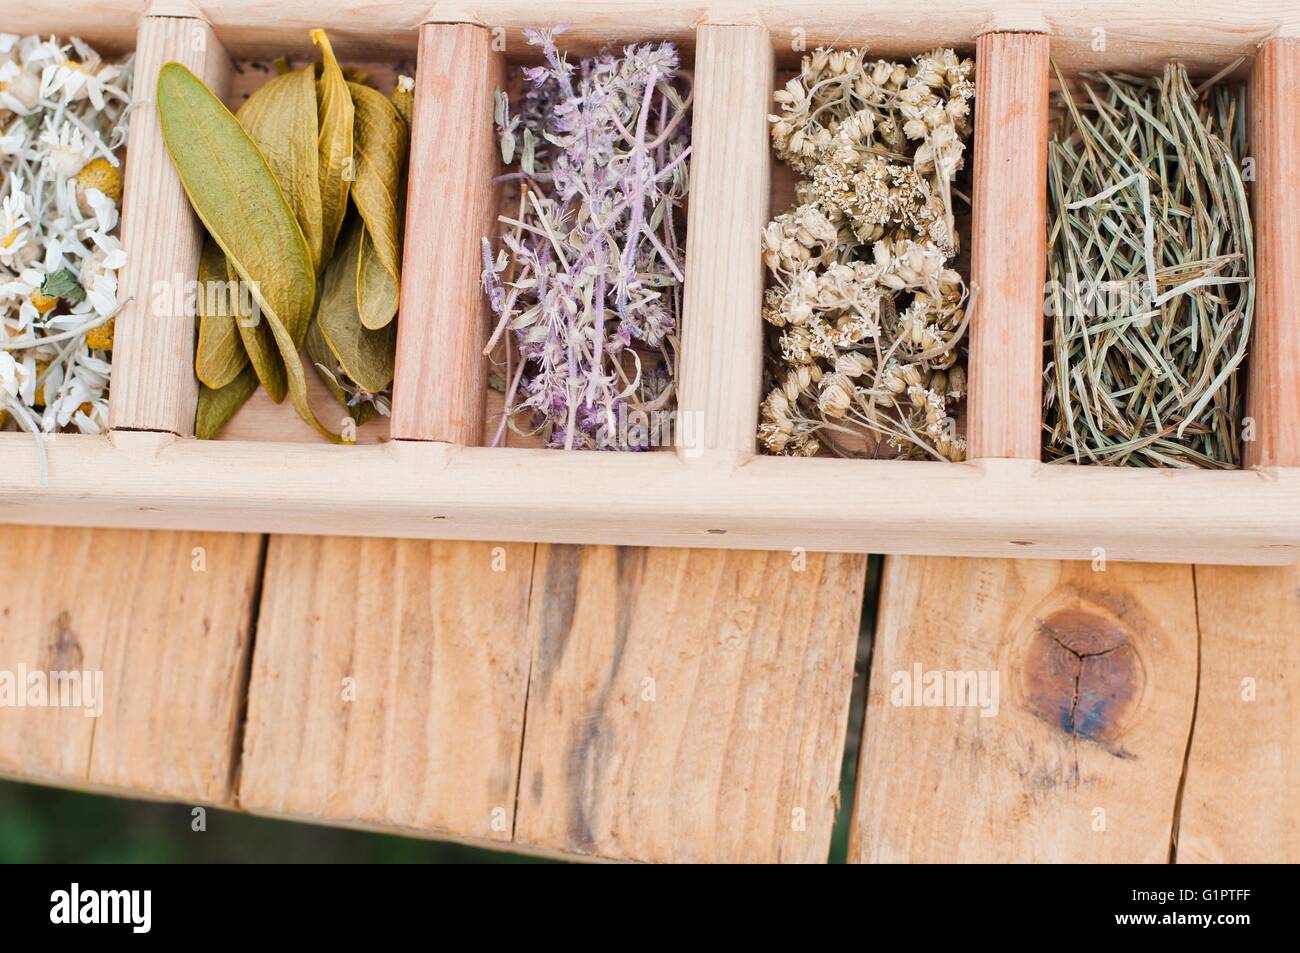 Assortment of dry medicinal herbs in wooden box Stock Photo